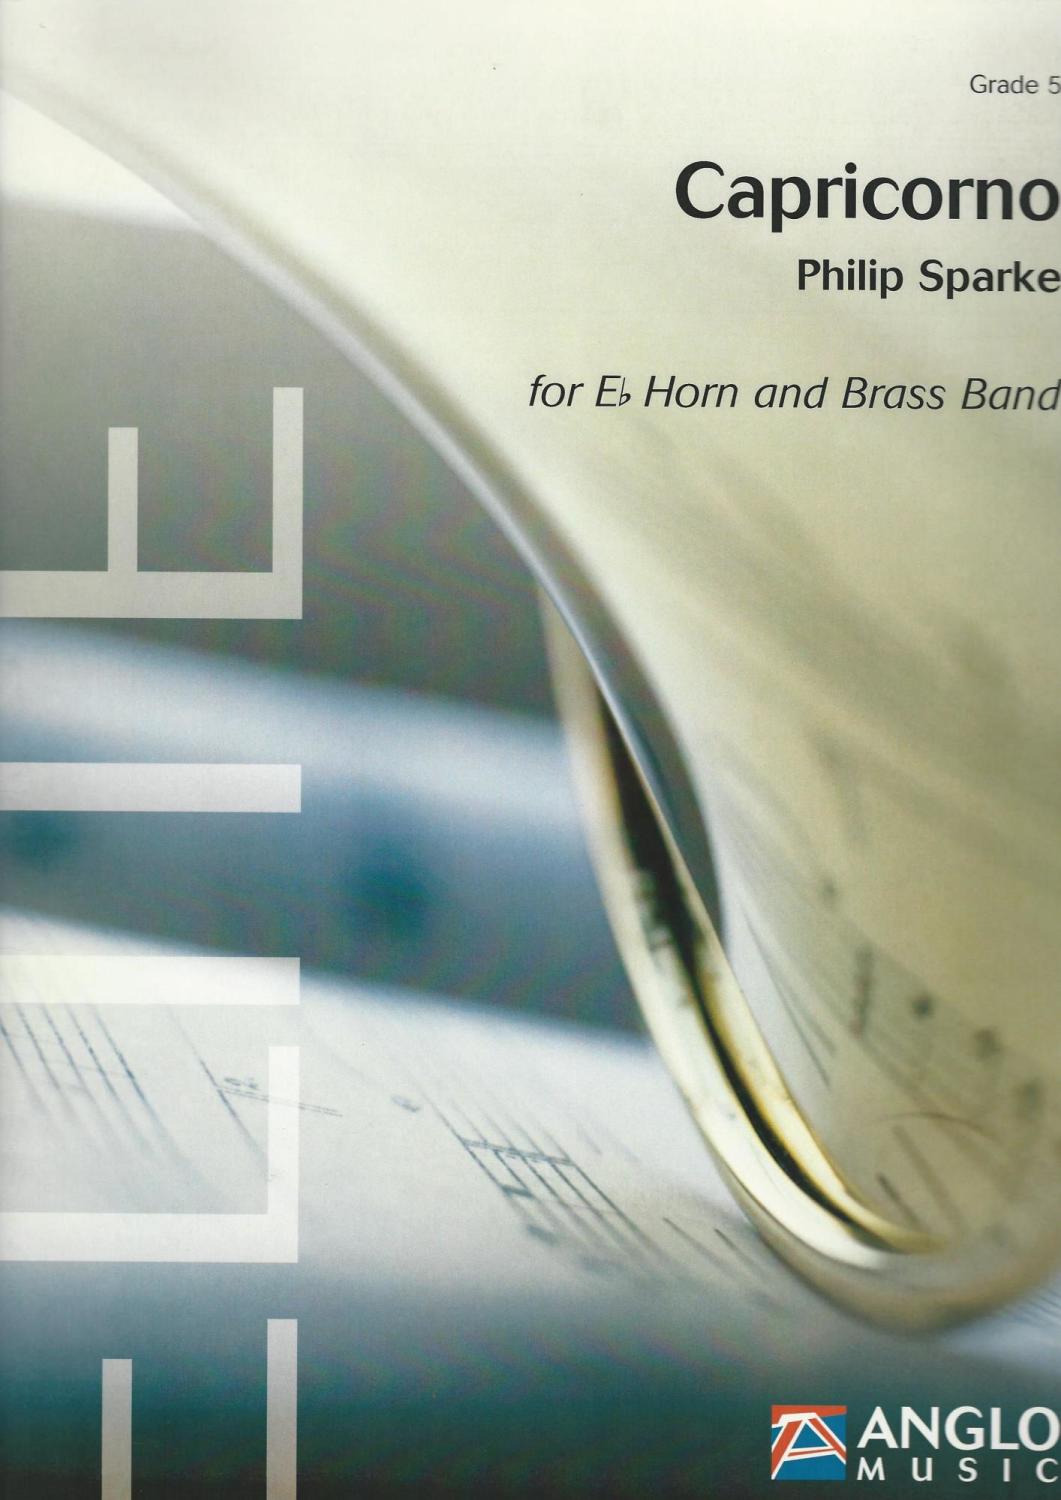 Capricorno for Eb Horn and Brass Band (Score Only) - Philip Sparke